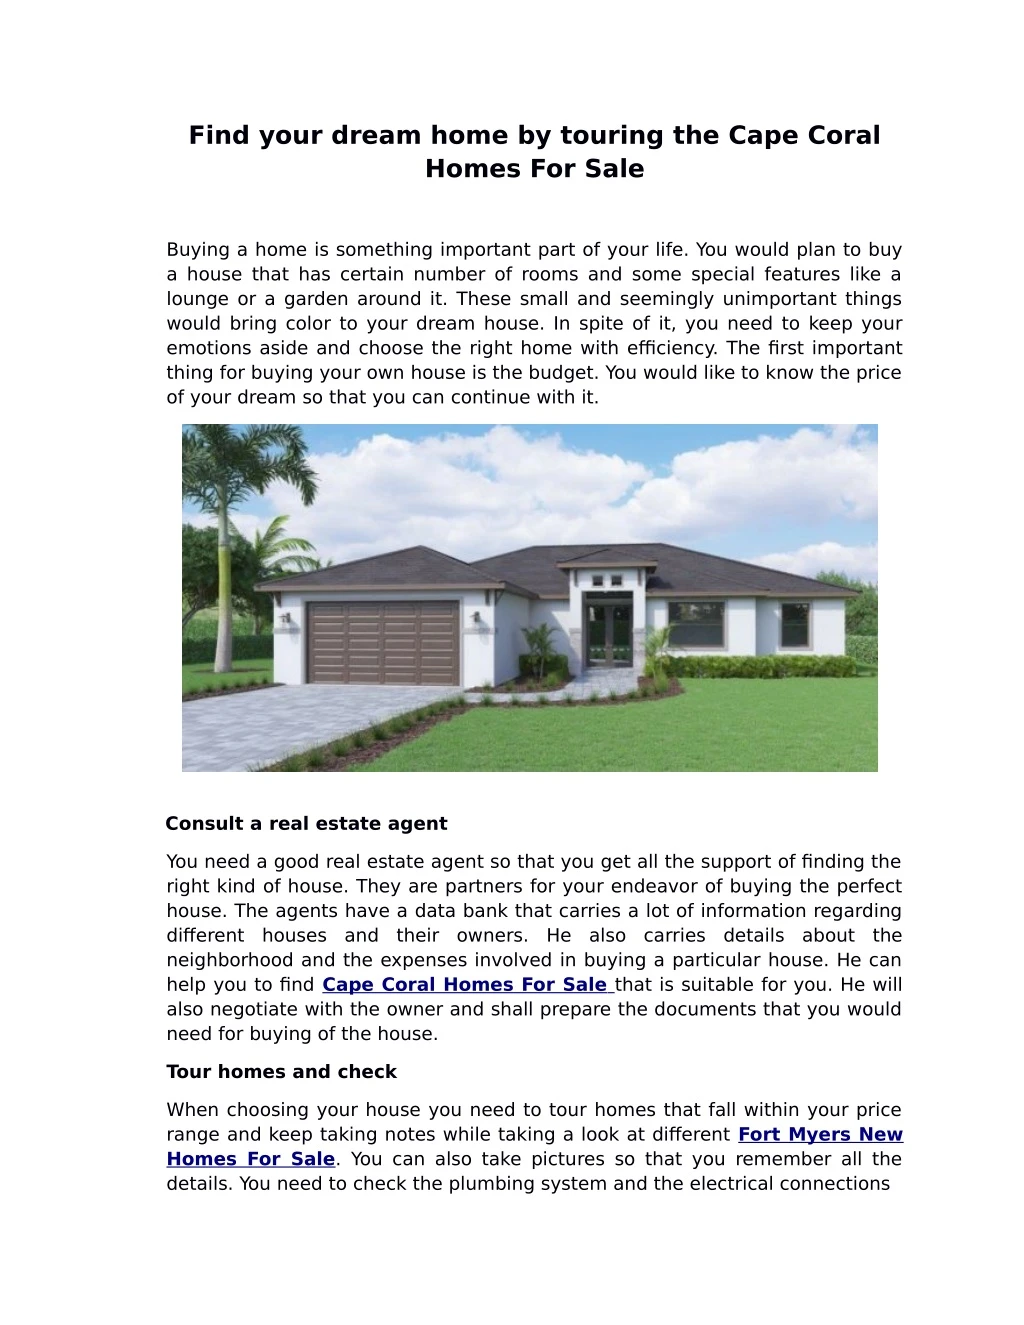 find your dream home by touring the cape coral